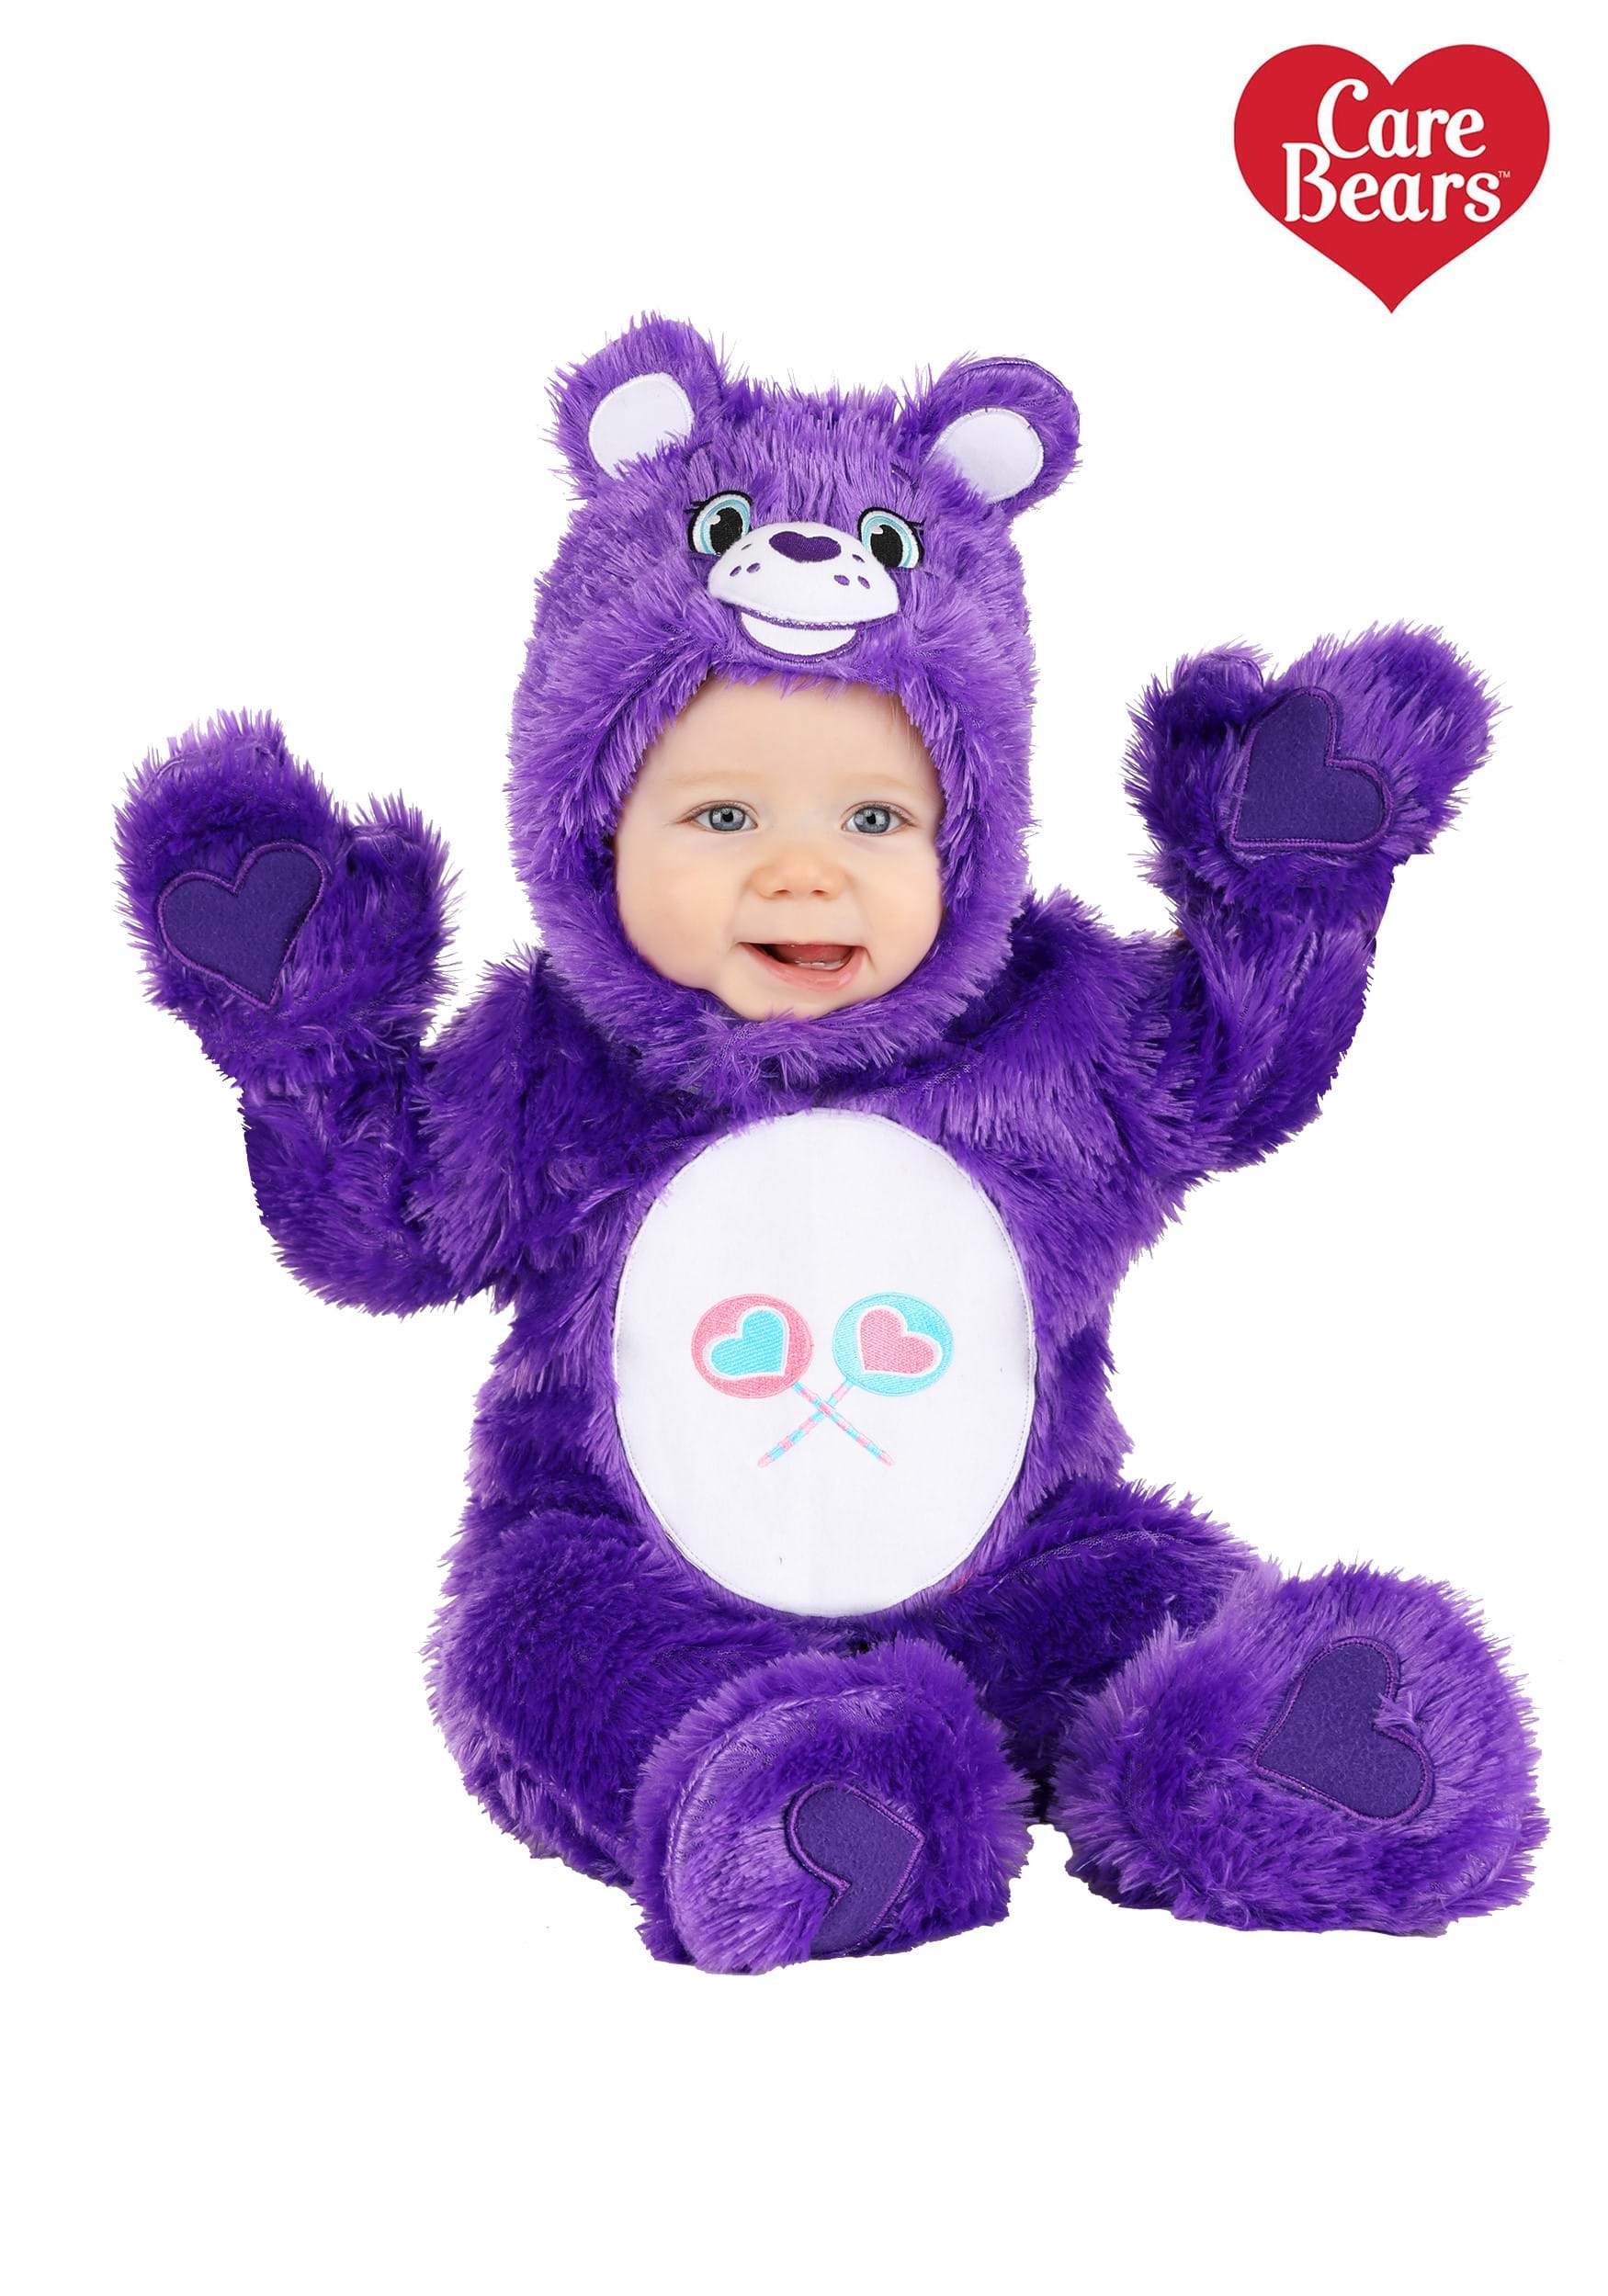 care bears costumes